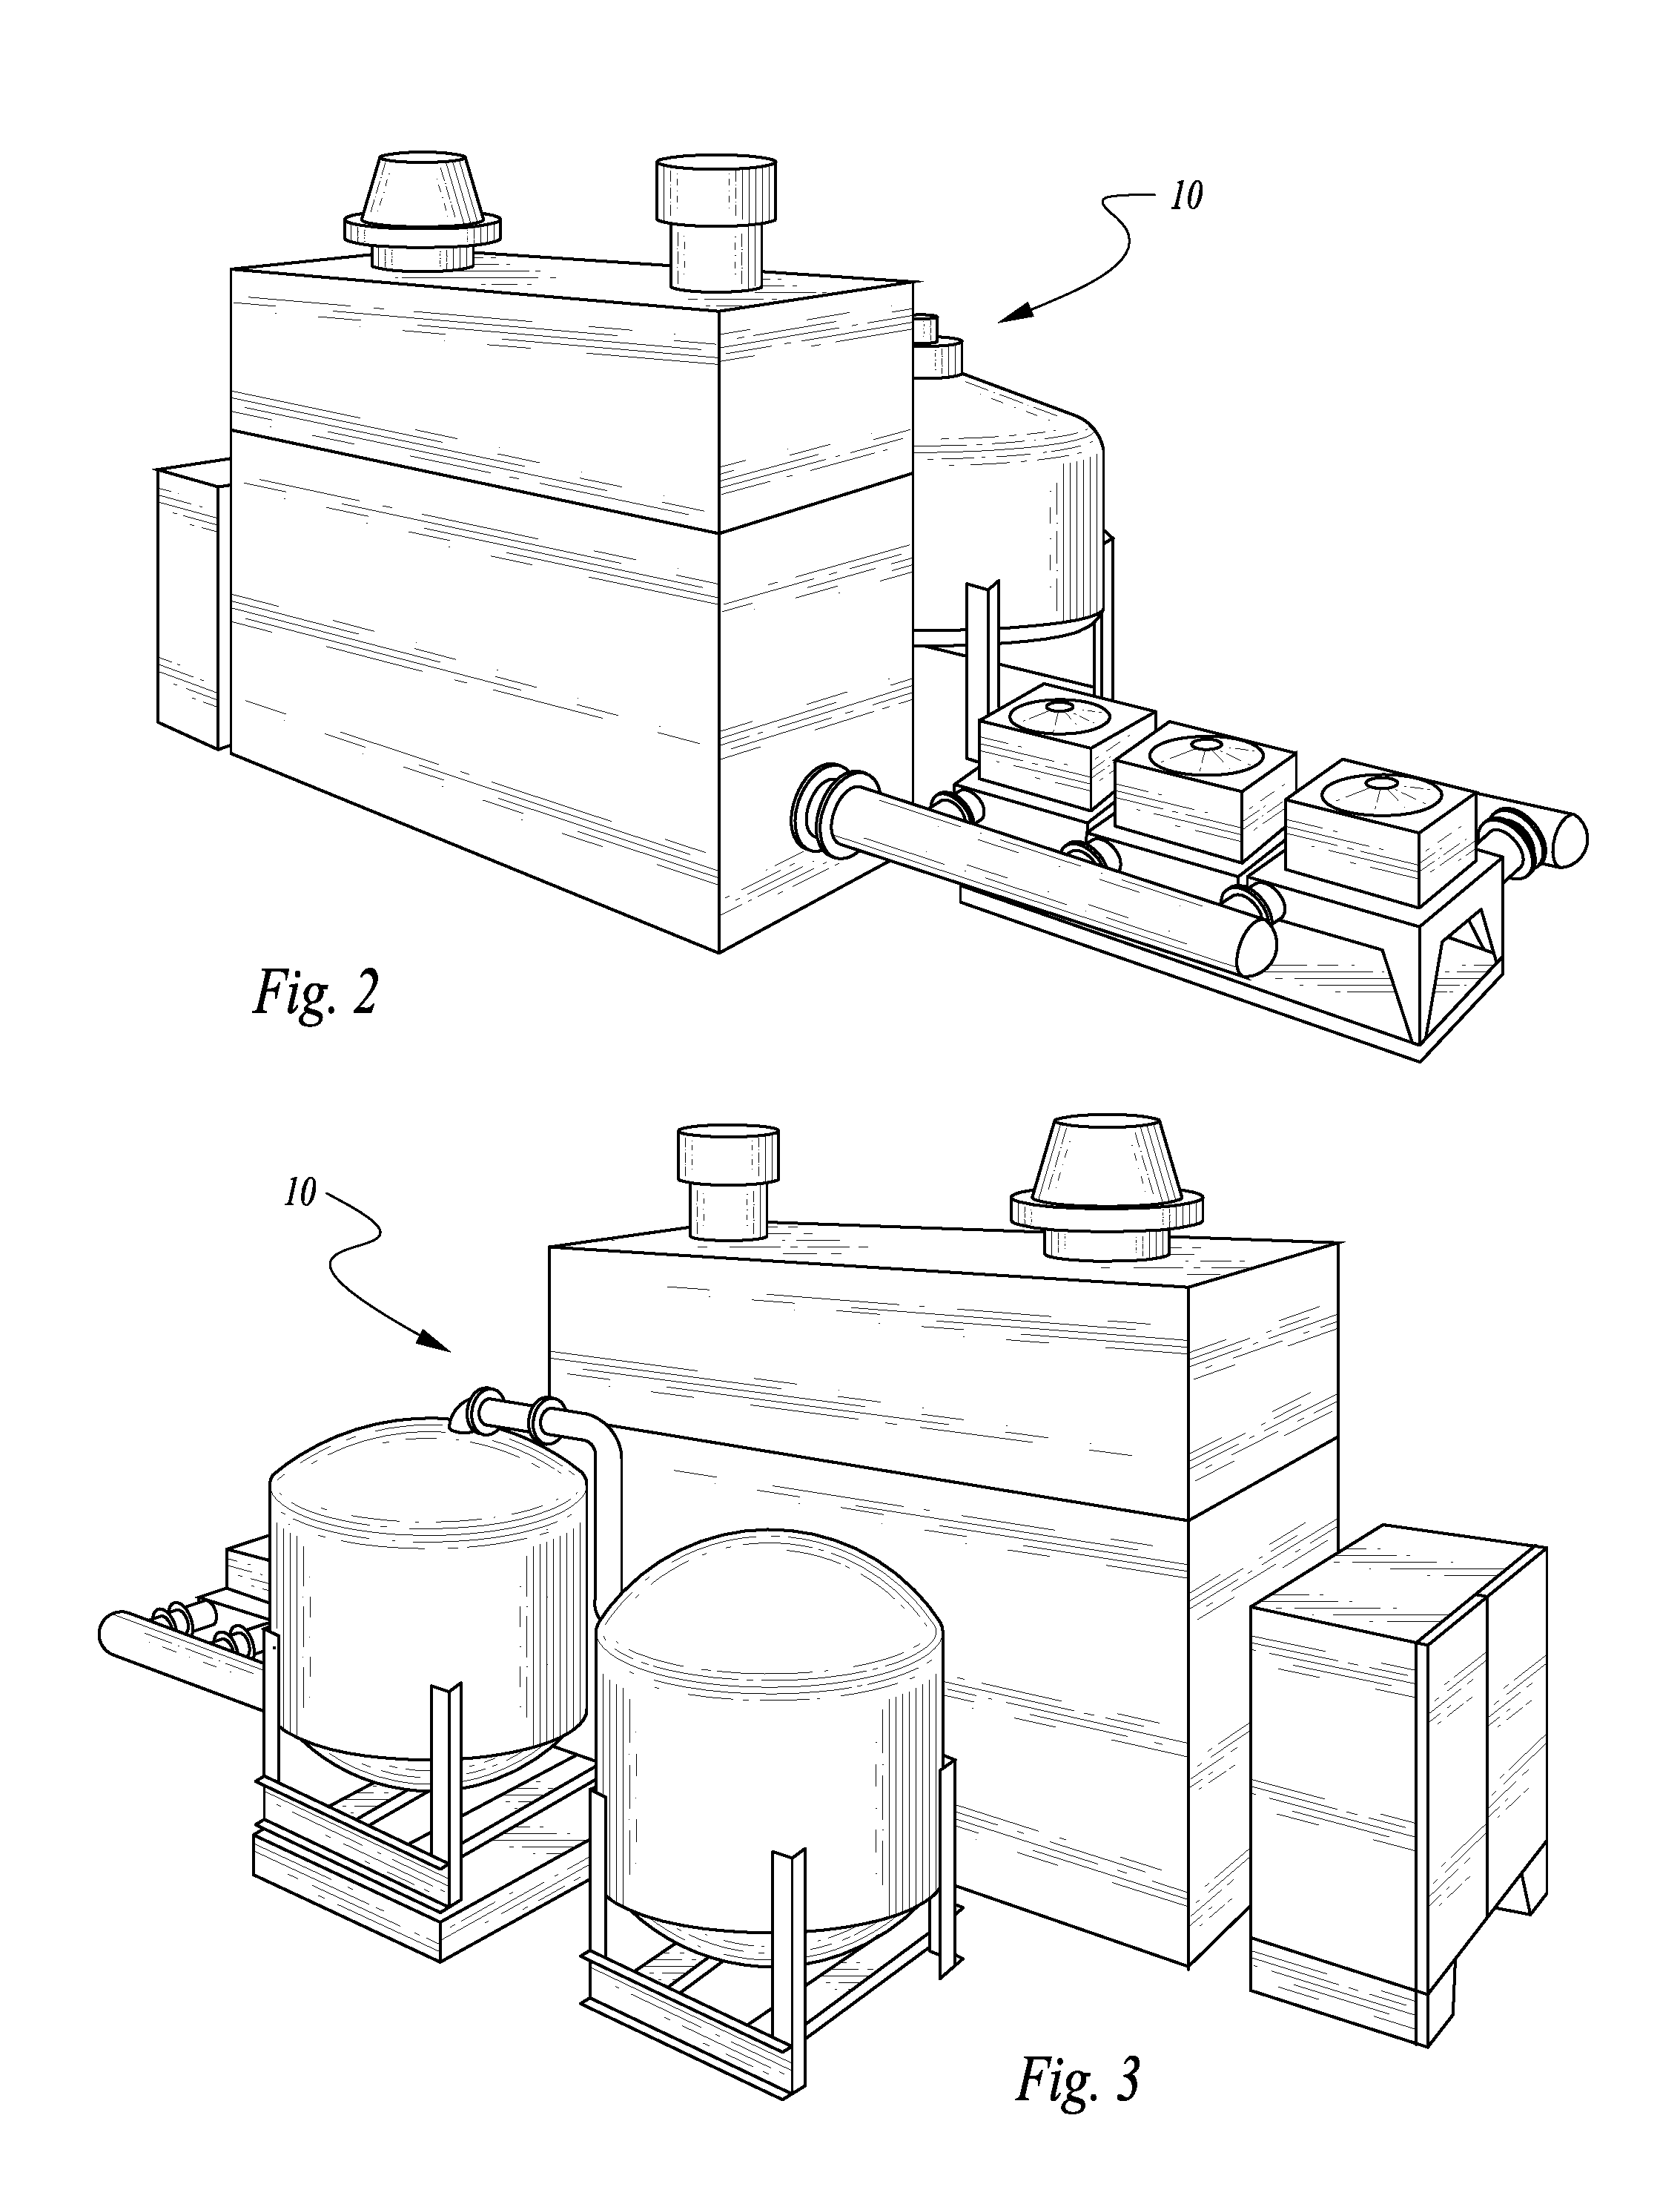 Method and system for high reliability oxygen supply from multiple units